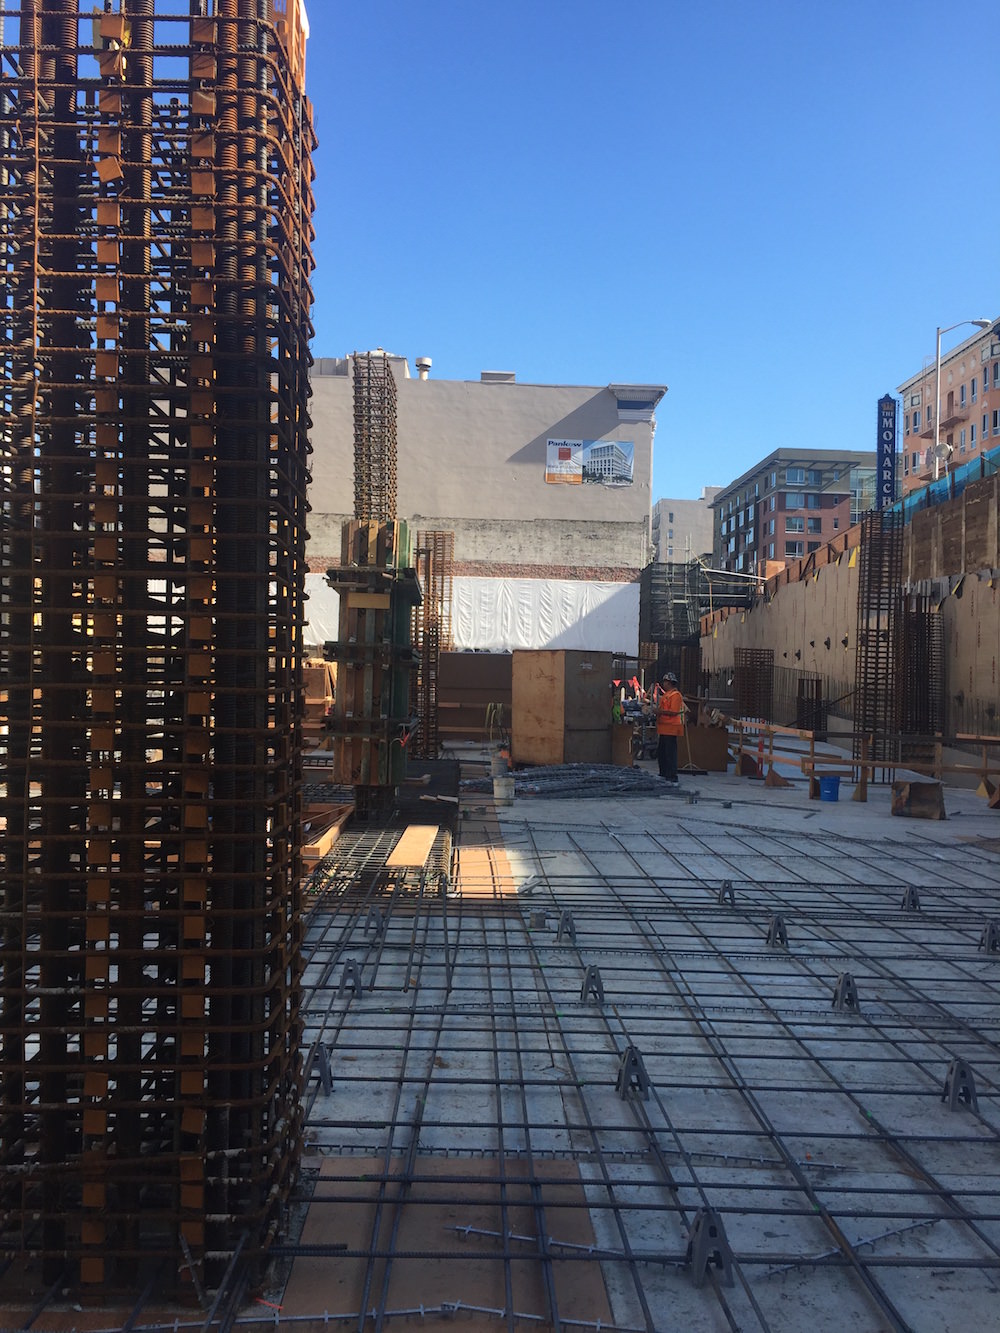 Van Ness Medical Office Building Update April 2017 - The Conco Companies 3